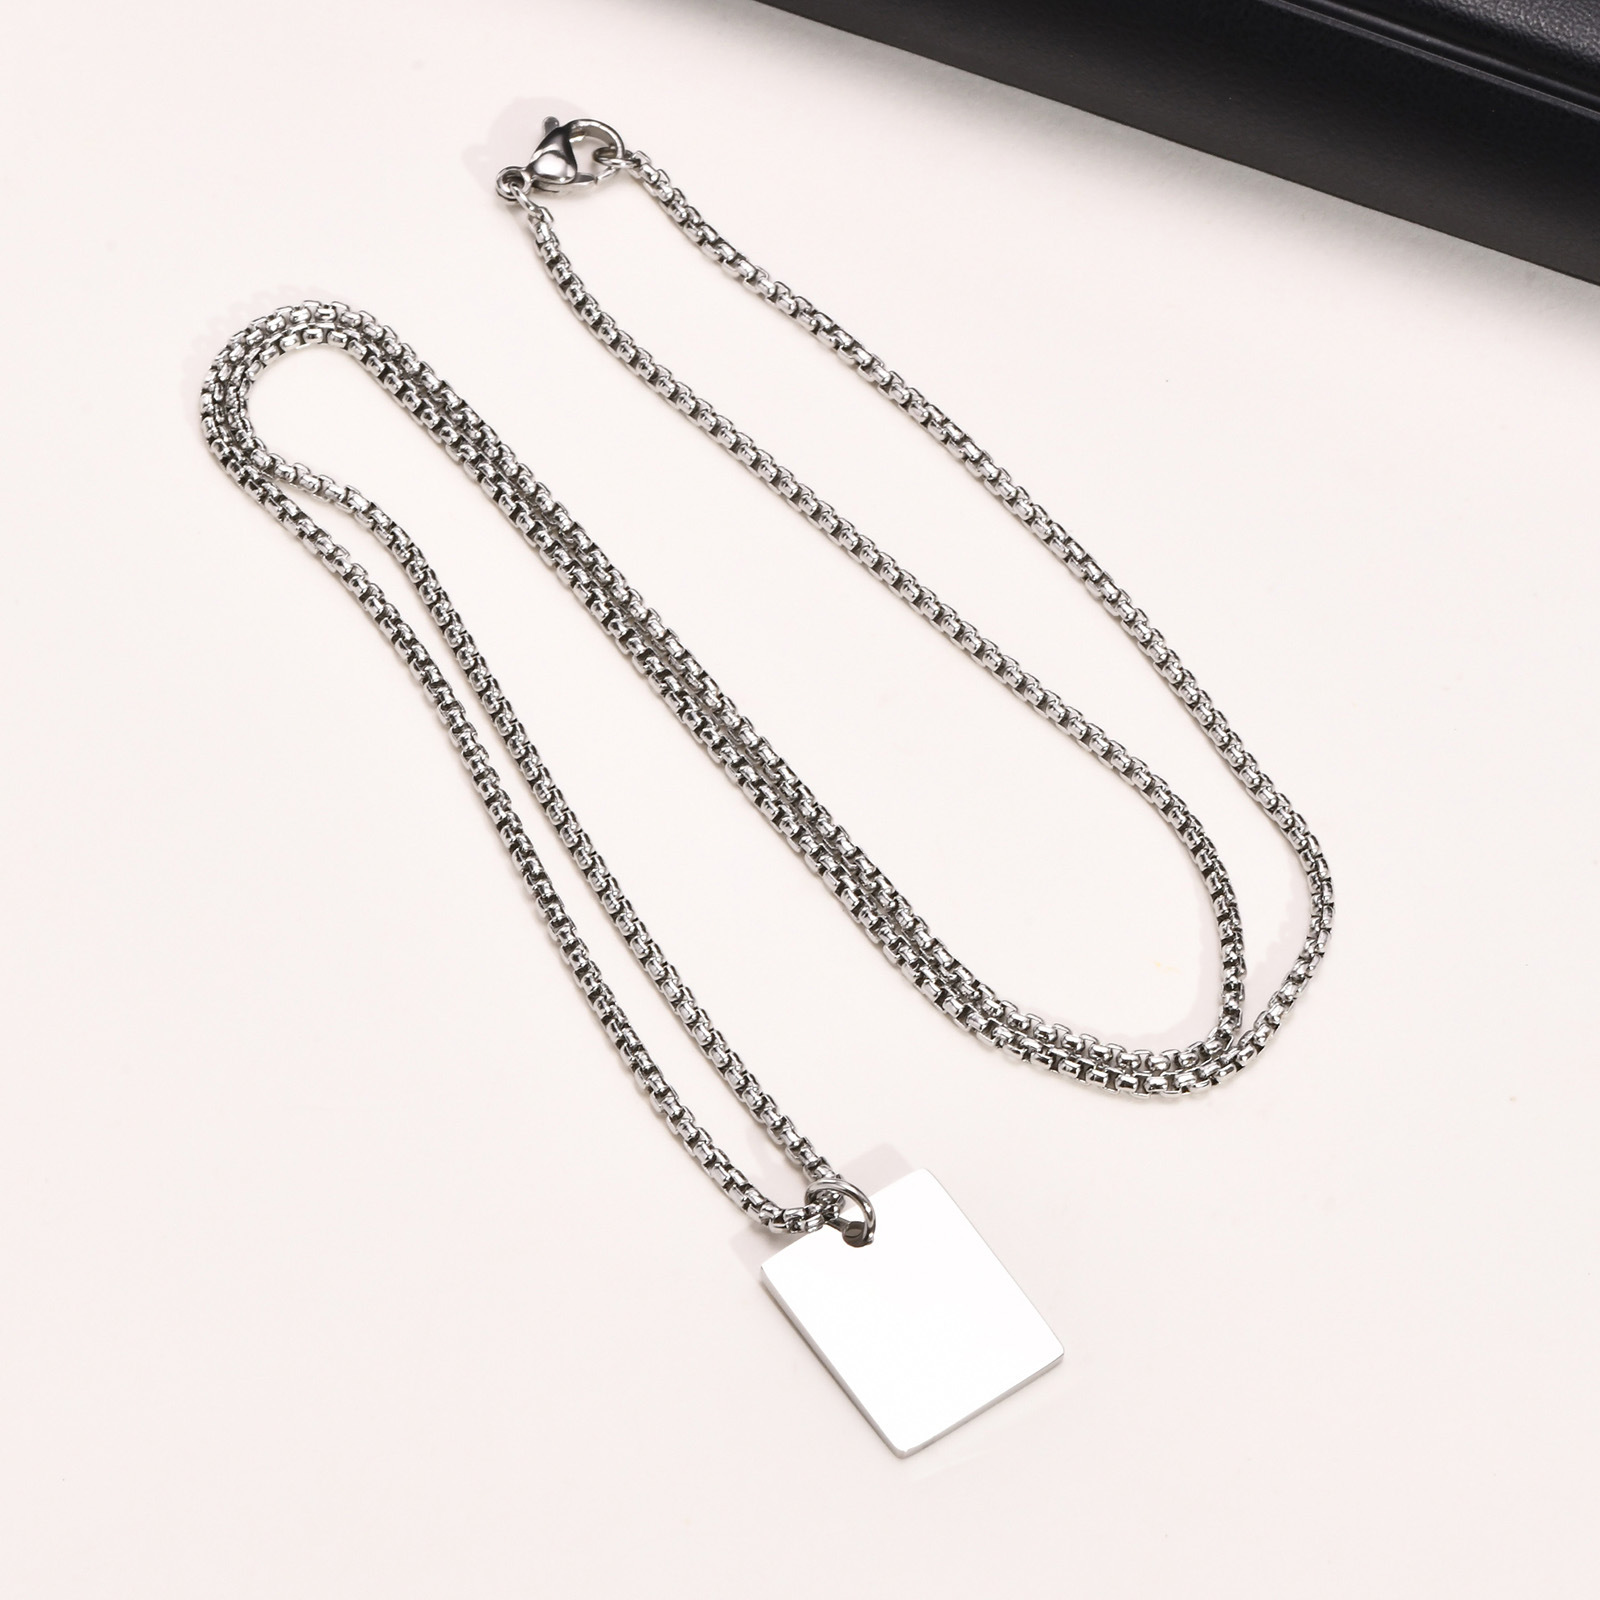 3:Steel pendant with chain